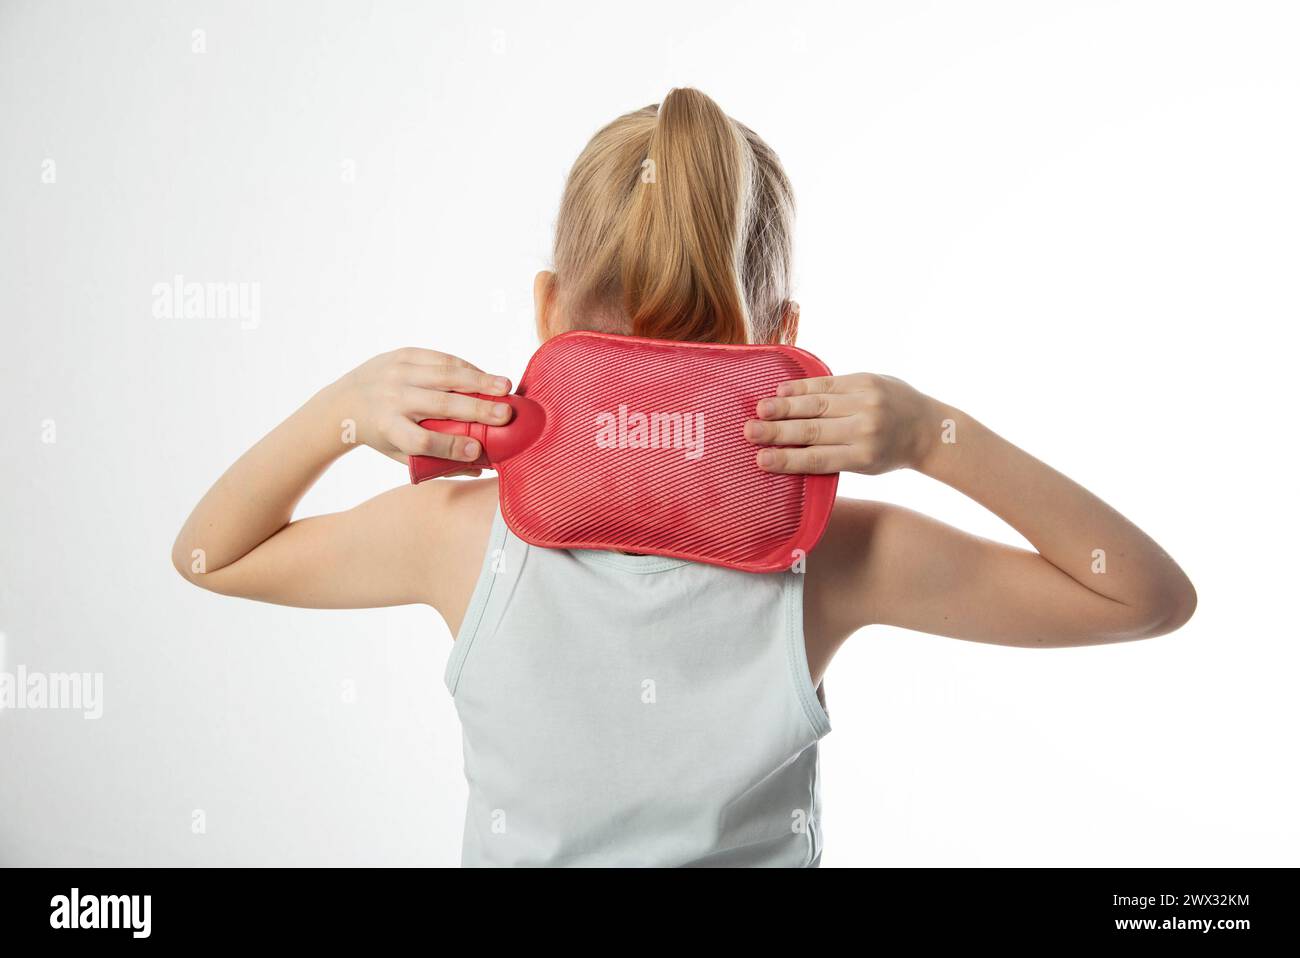 A little girl applies a red heating pad with warm water to her neck. Relieving neck pain with heat, muscle spasms. Stock Photo